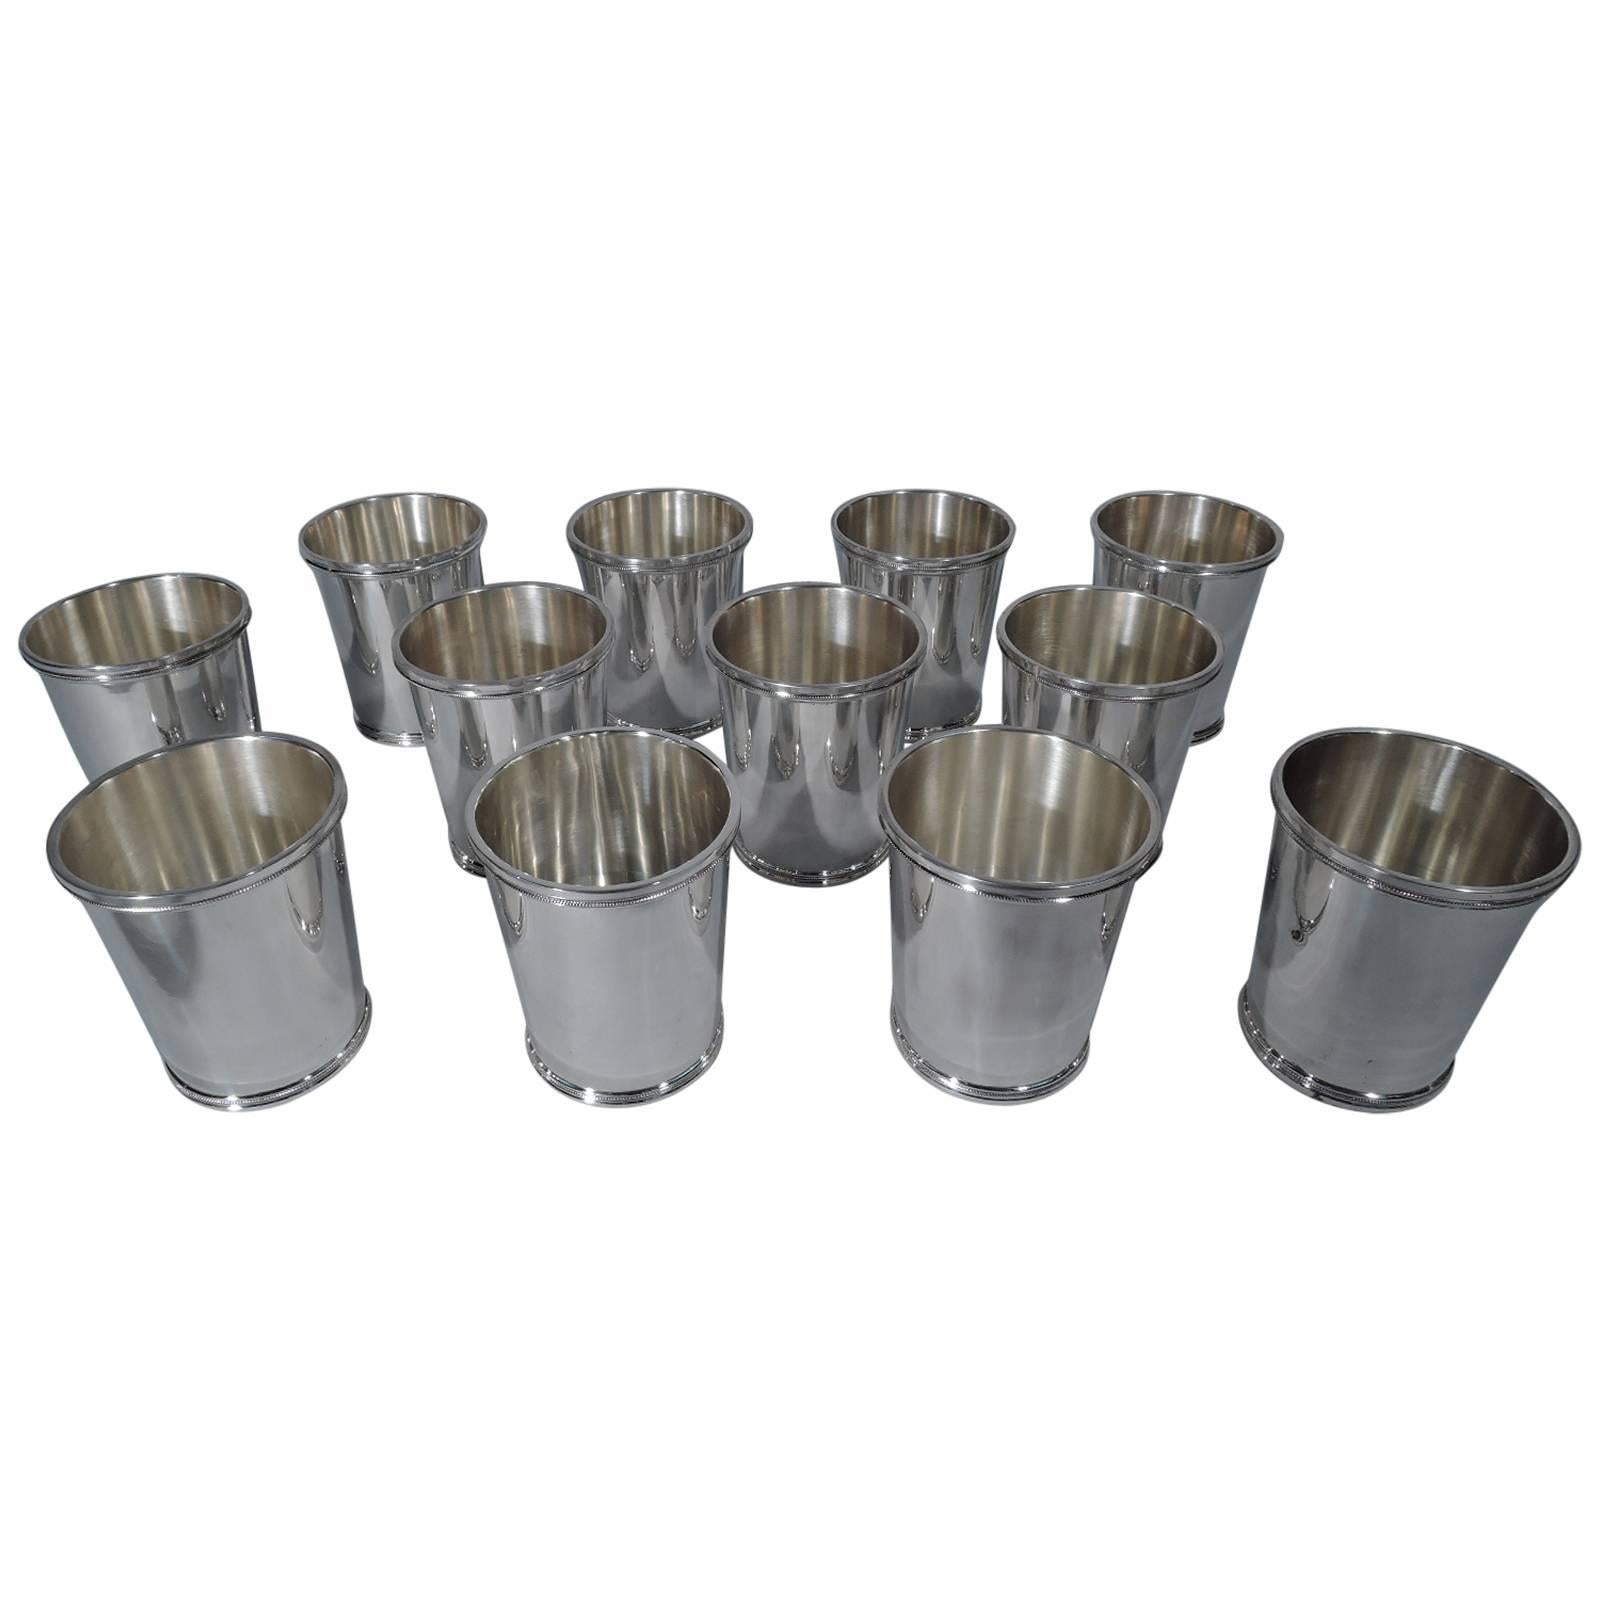 Set of 12 American Sterling Silver Mint Julep Cups